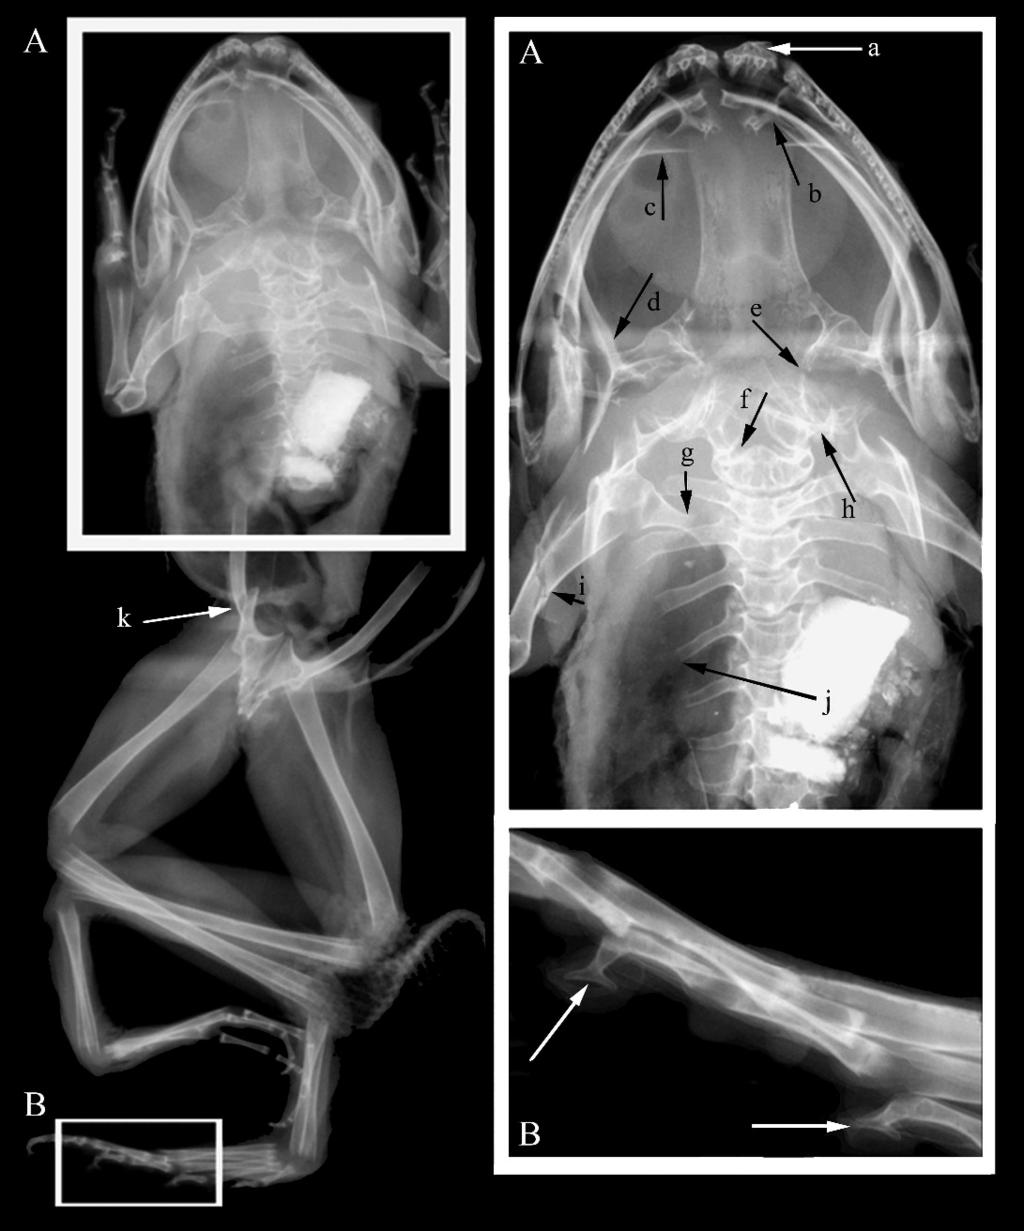 454 HERPETOLOGICA [Vol. 64, No. 4 FIG. 3. X-ray images of Cycloramphus jordanensis (MZUSP 4522). (A) Dorsal view of head and trunk. (B) Detail of terminal phalanx on left foot.